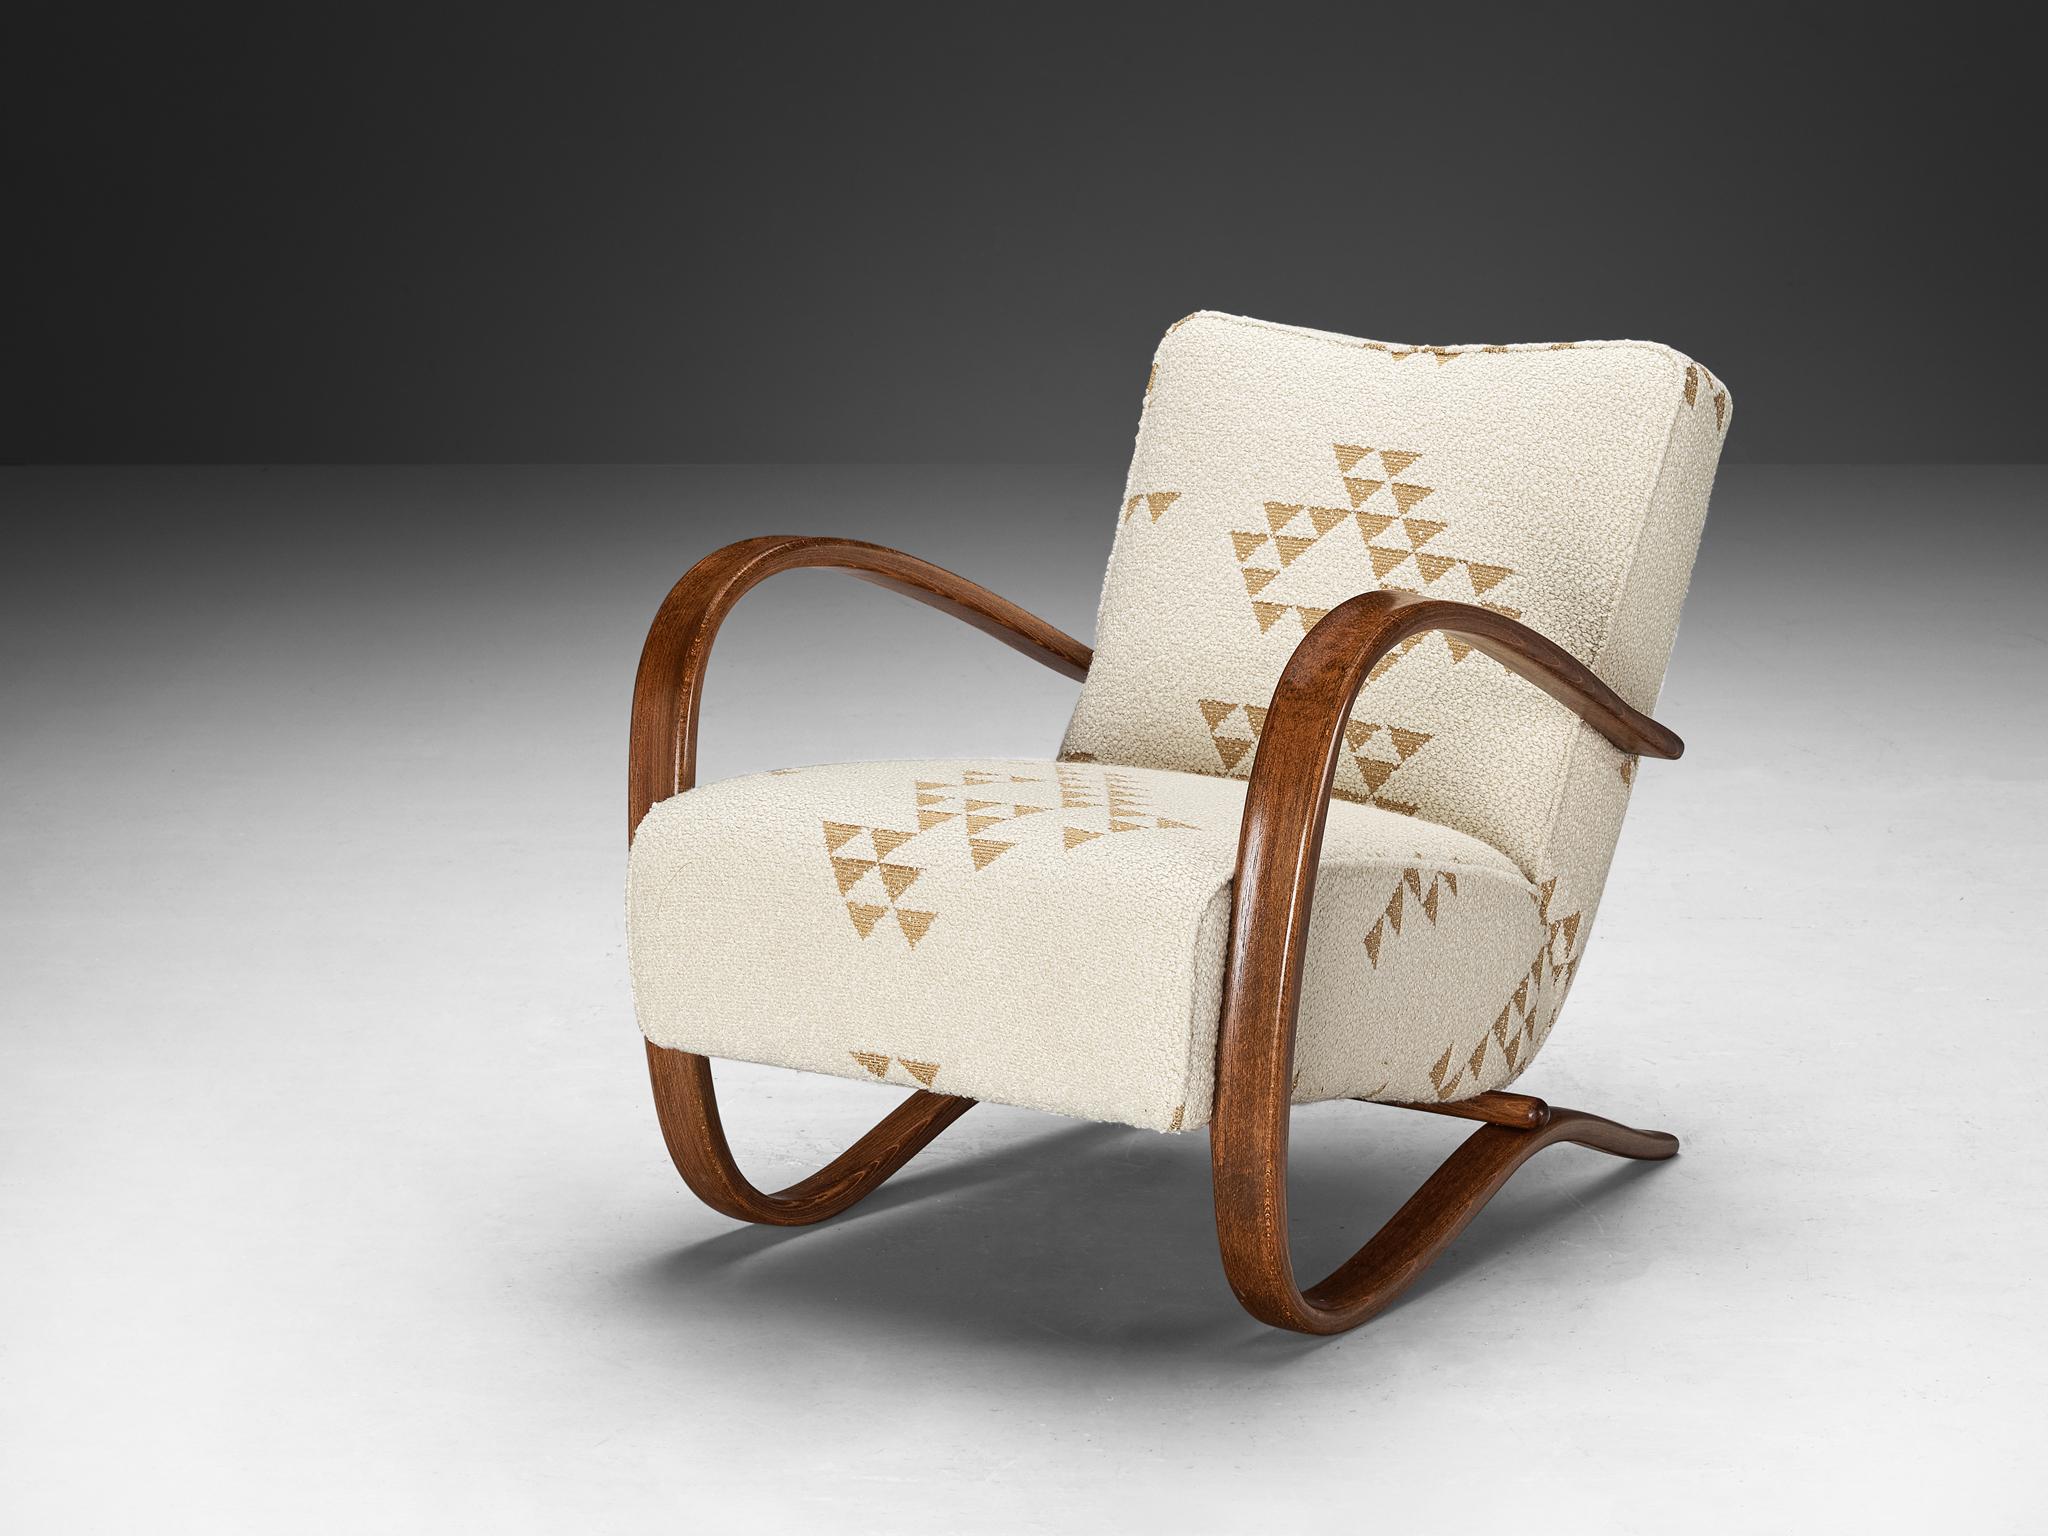 Jindrich Halabala, lounge chair, model 'H269', fabric, stained beech, Czech Republic, 1930s.

Extraordinary easy chair upholstered in a neutral fabric with geometrical shapes. This design shows a very dynamic and abundant appearance. Beautifully